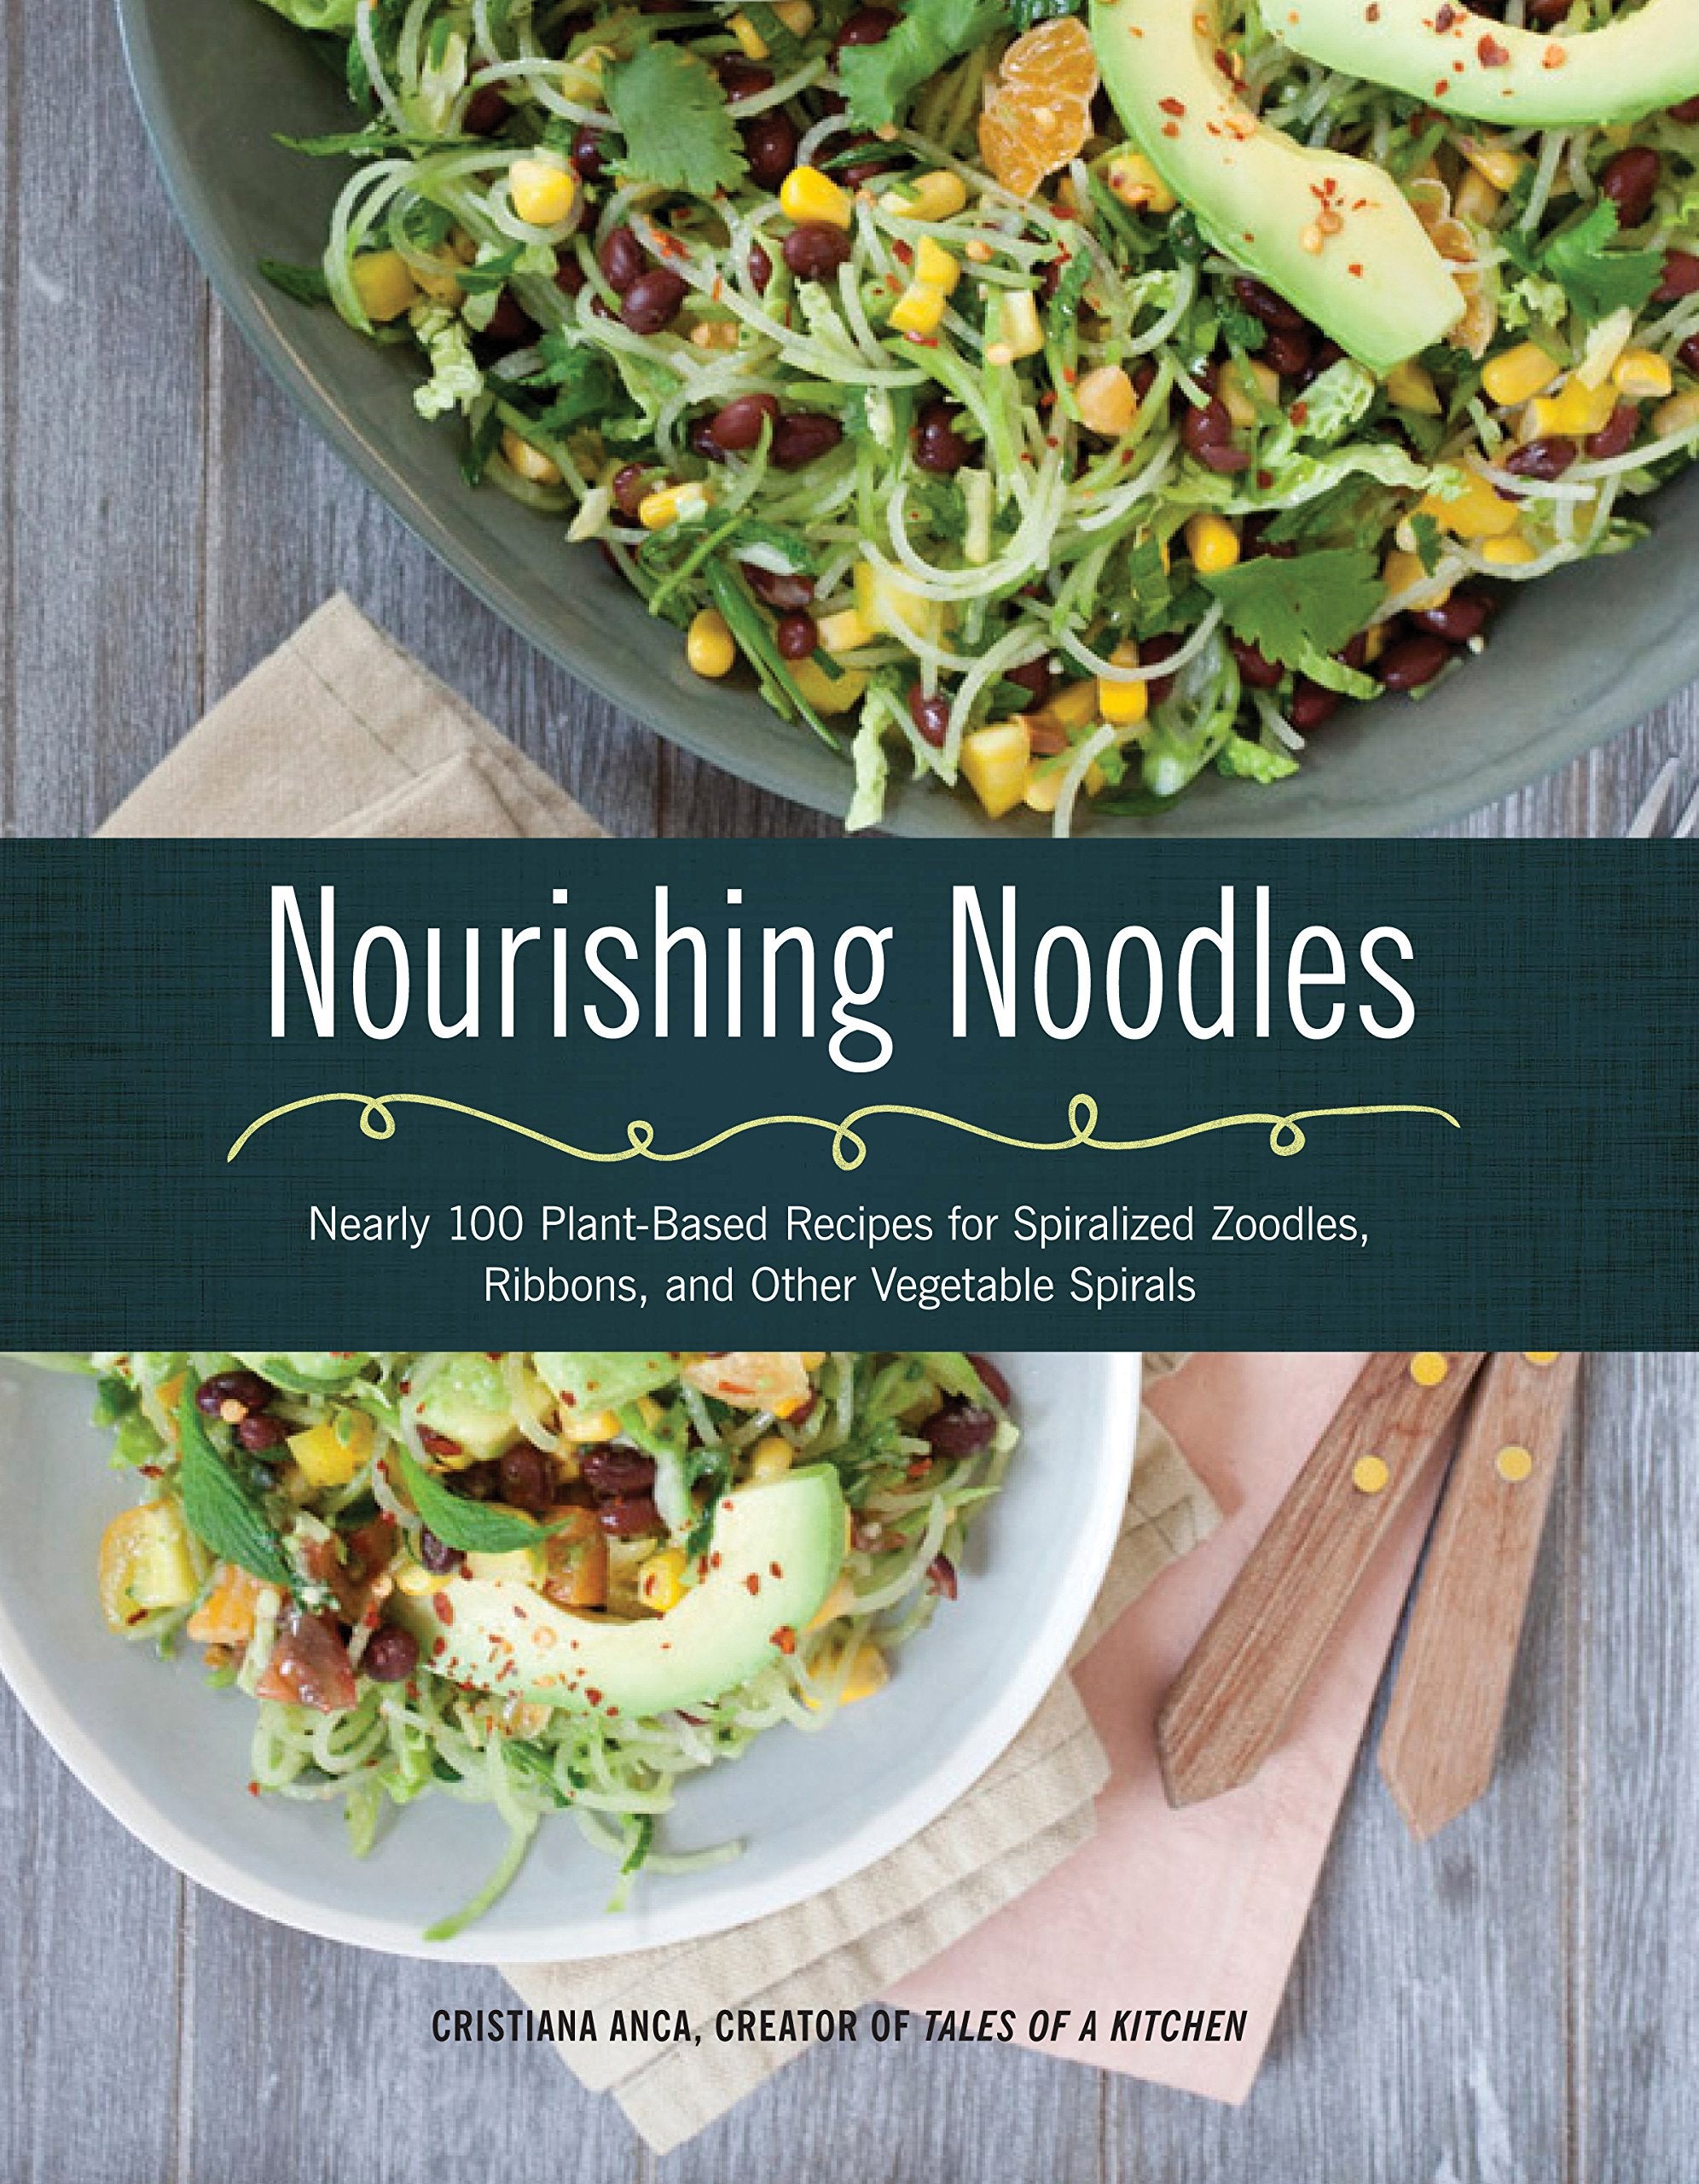 *Sale* (Vegetarian) Chris Anca. Nourishing Noodles: Spiralize Nearly 100 Plant-Based Recipes for Zoodles, Ribbons, and Vegetable Spirals.